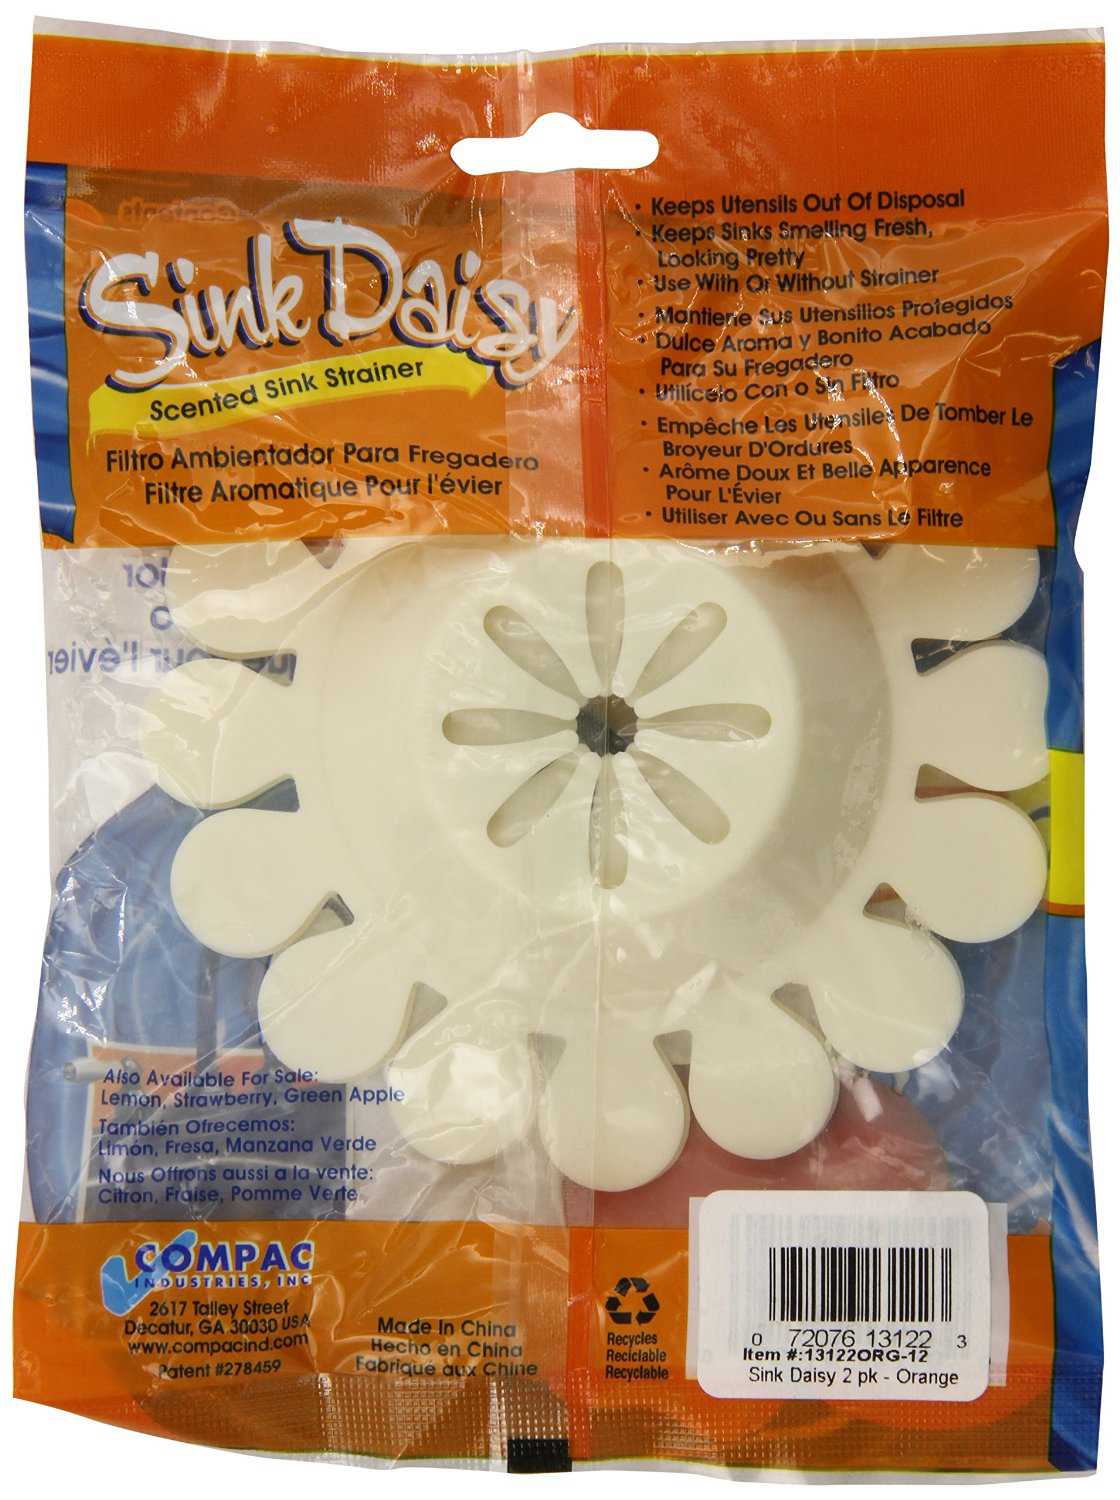 Compac Sink Daisy Scented Sink Strainer, Lemon, 2 Count